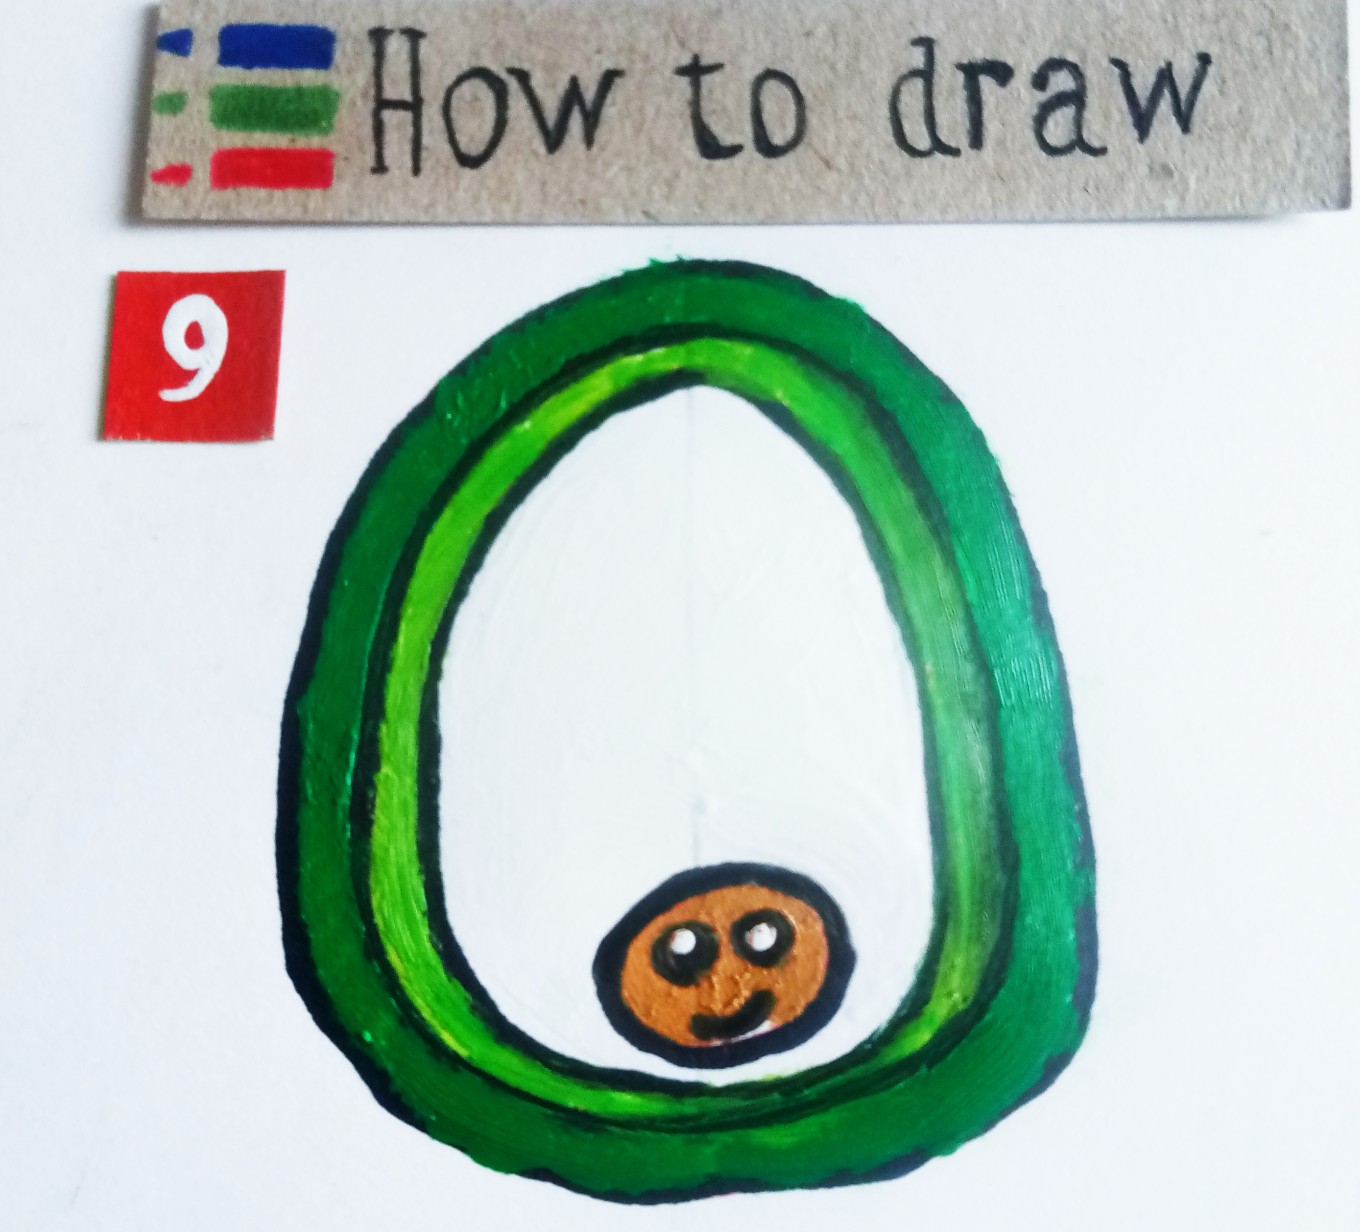 How to draw an avocado - step by step tutorial